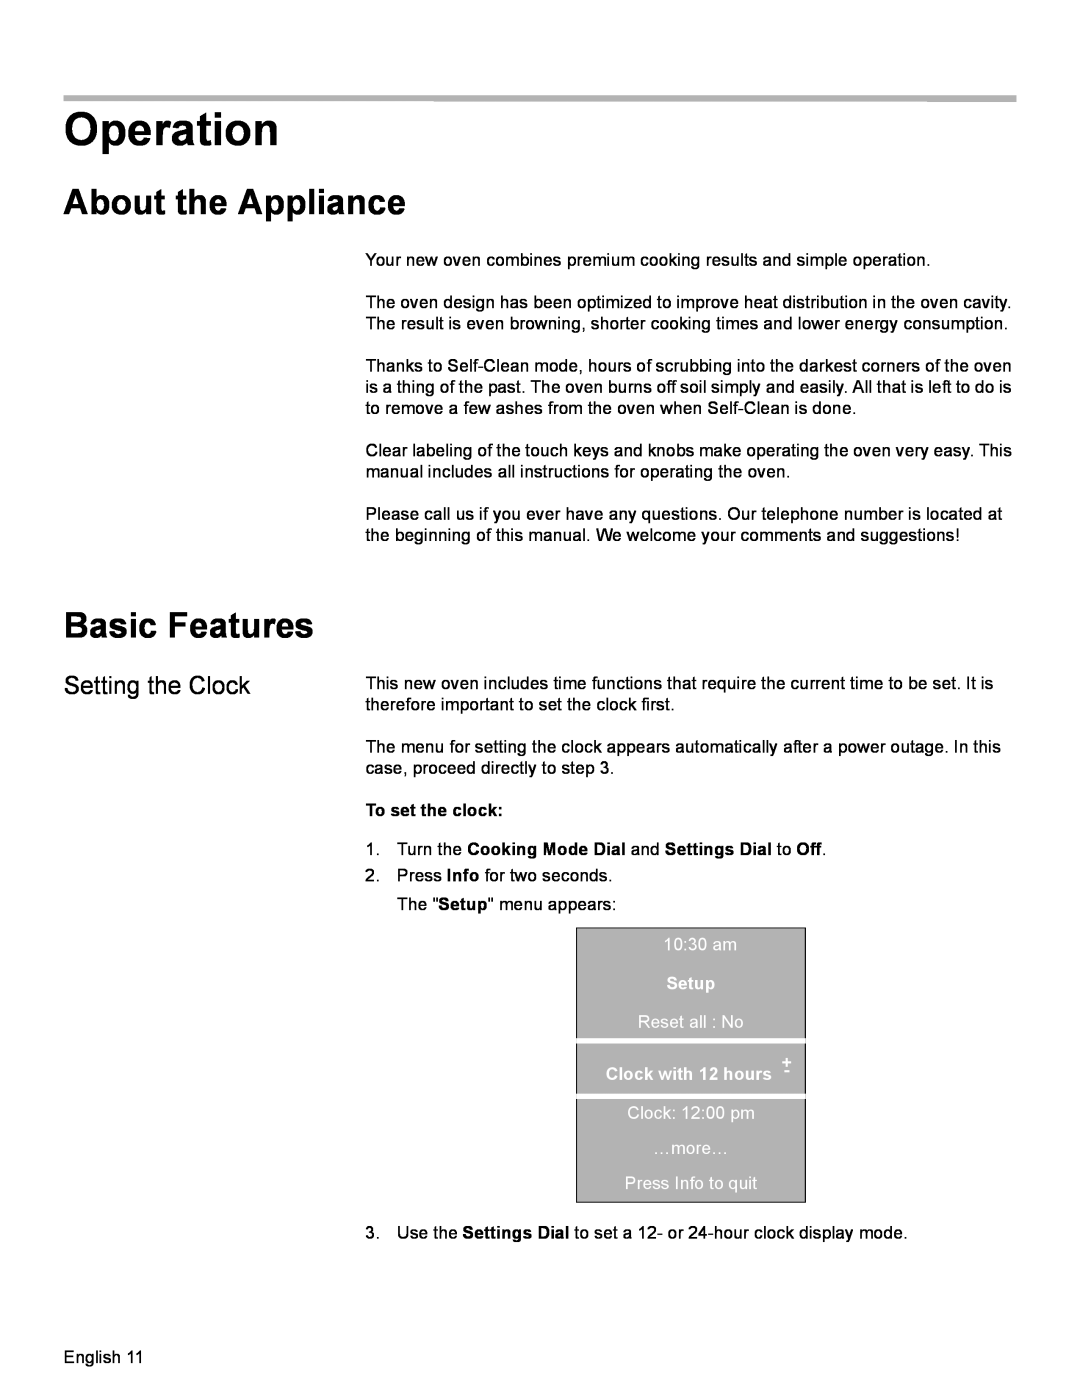 Bosch Appliances HBN56, HBL57, HBL56, HBN54 manual Operation, About the Appliance, Basic Features, To set the clock 